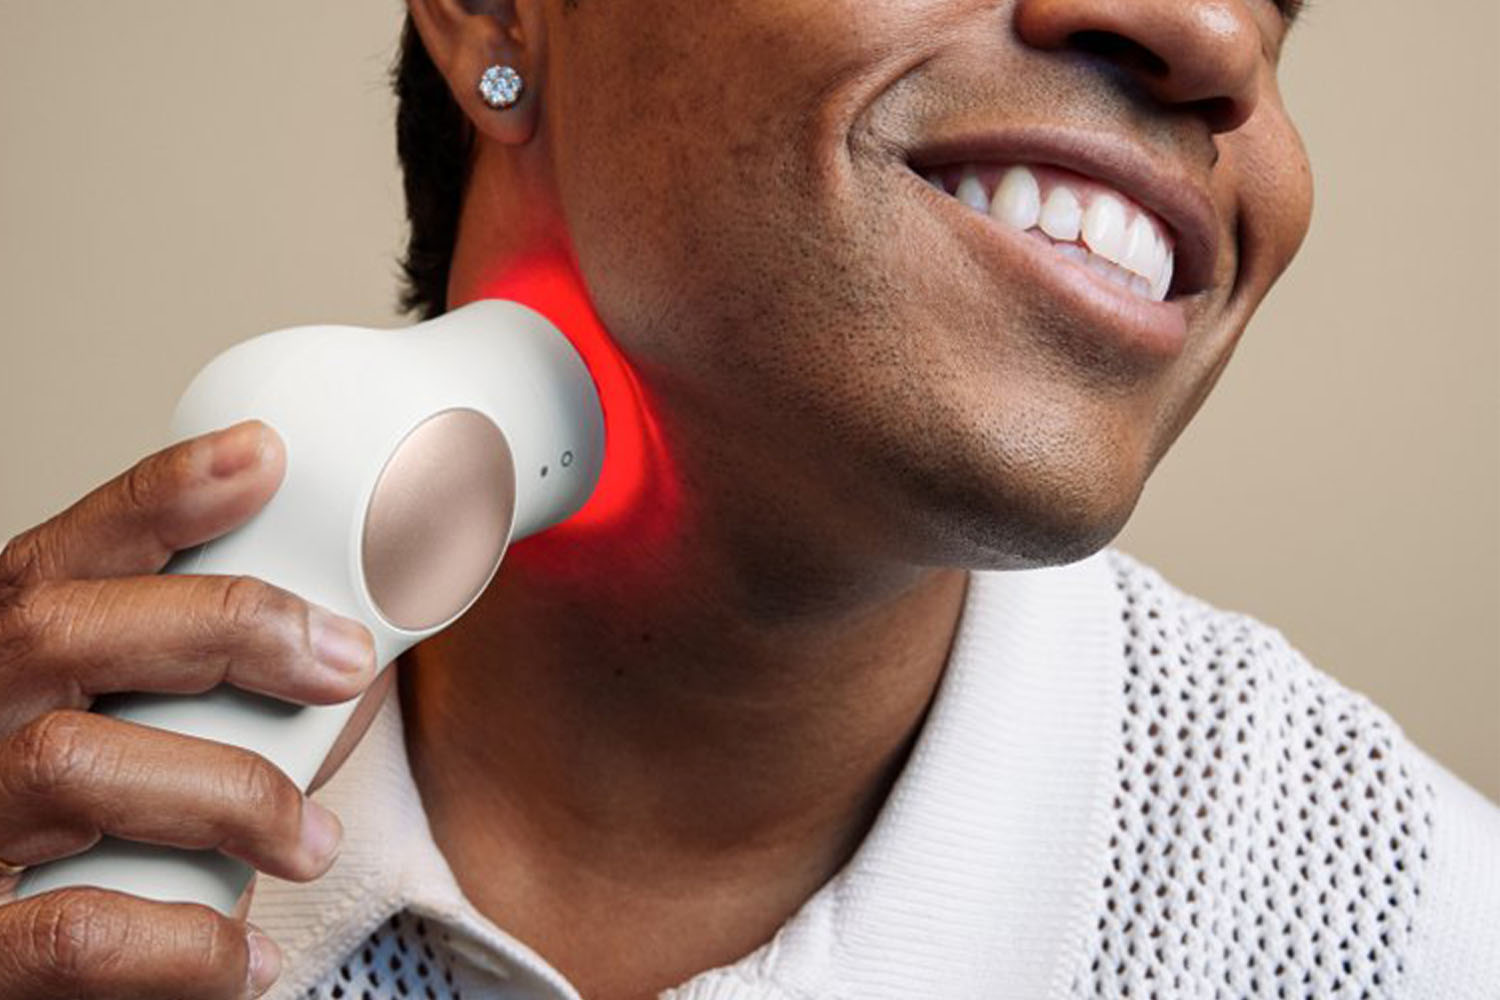 A therapeutic device that a model uses on her neck